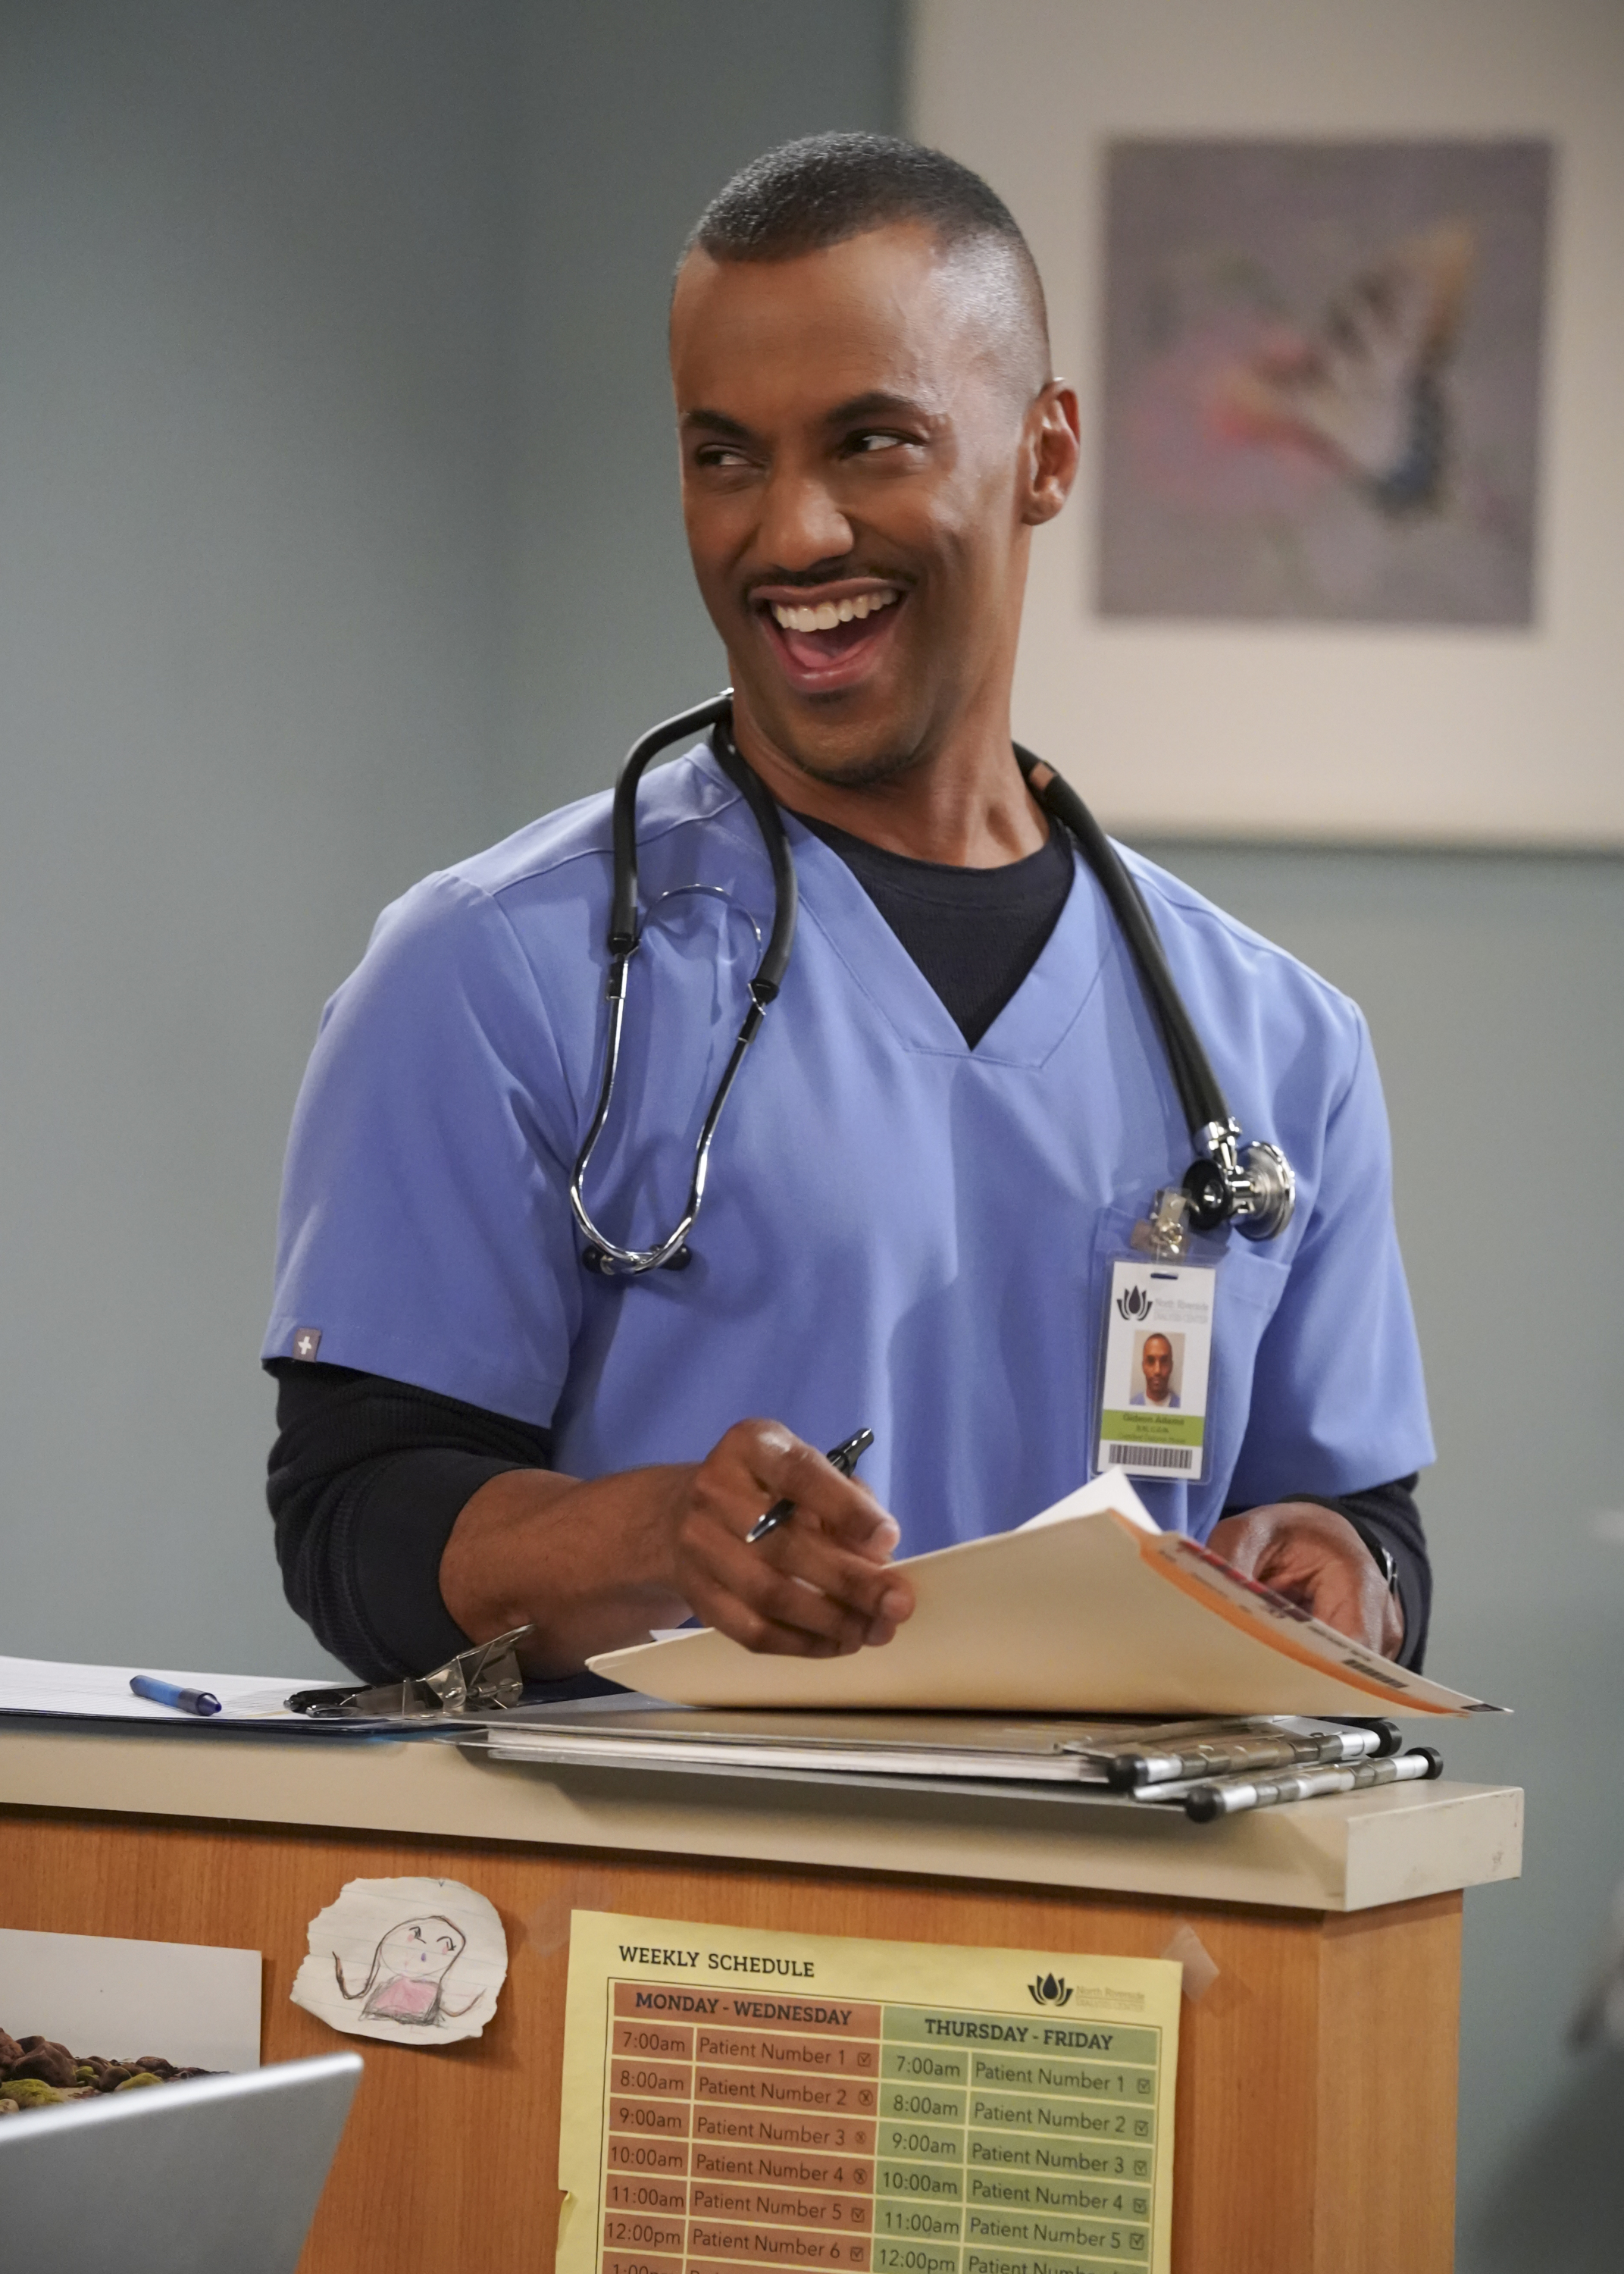 Darryl in character wearing a medical scrub with a stethoscope, smiling while reading a paper